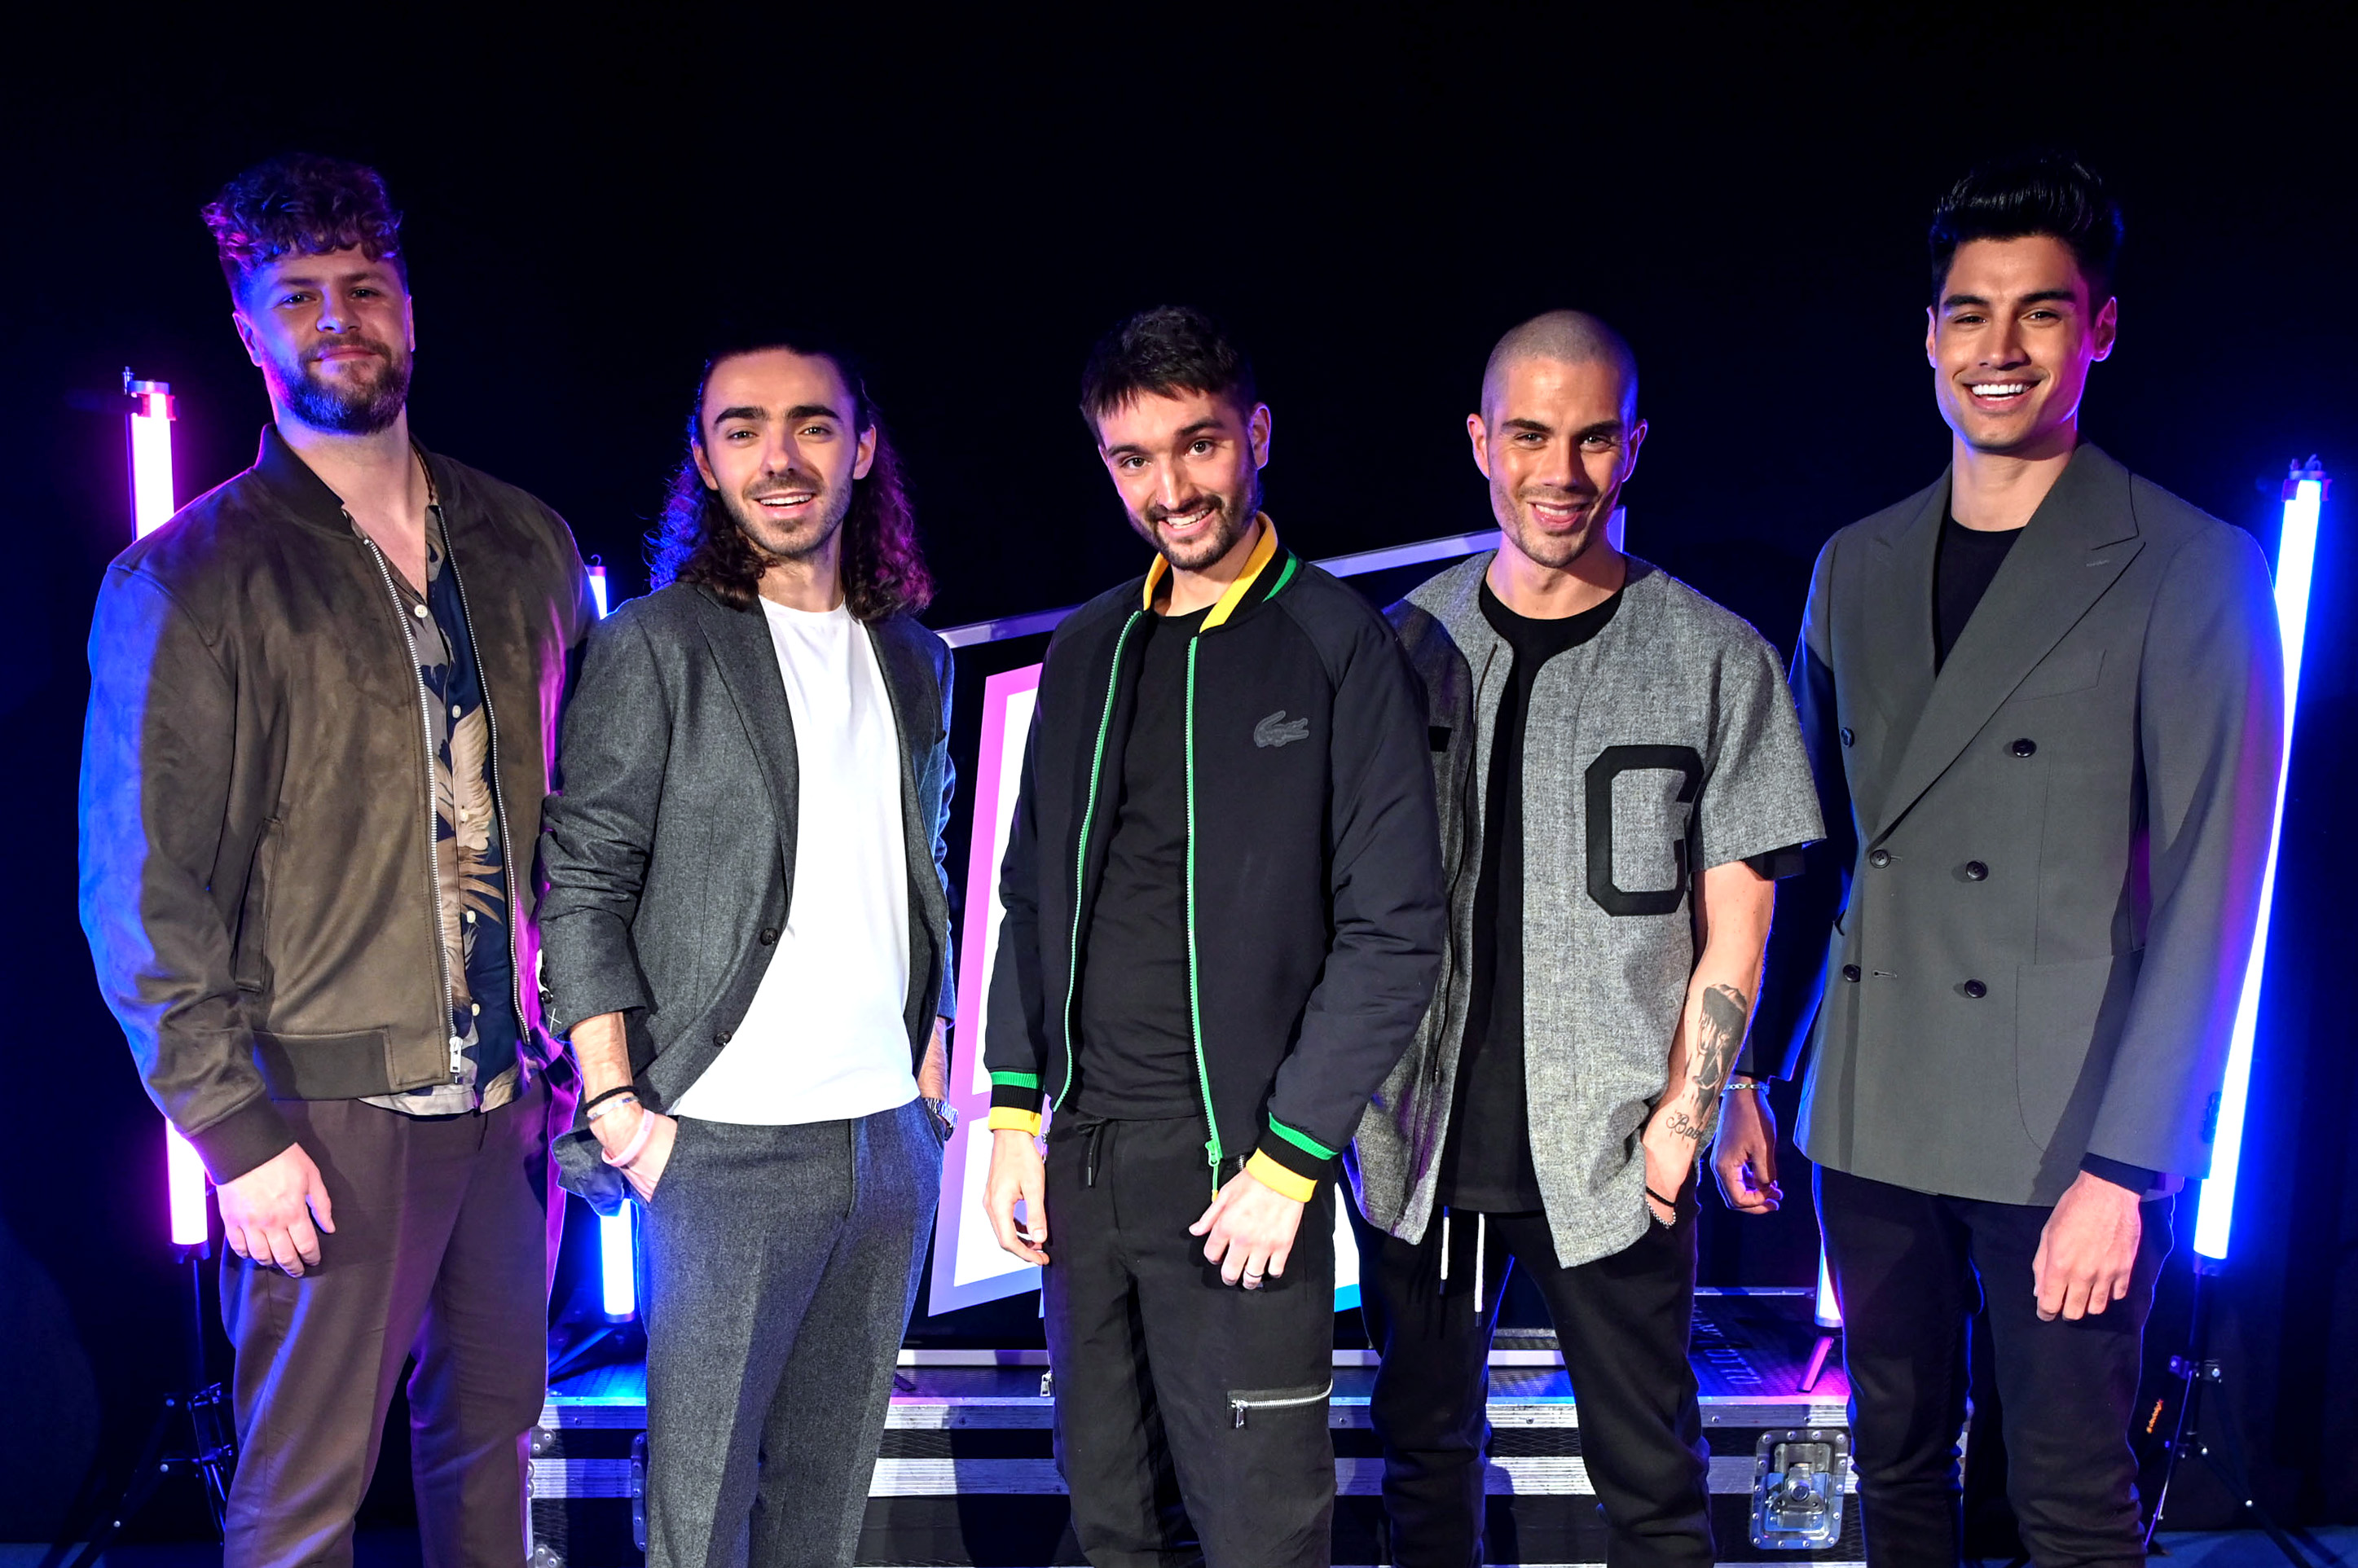 The Wanted enjoyed such smash hits as Glad You Came